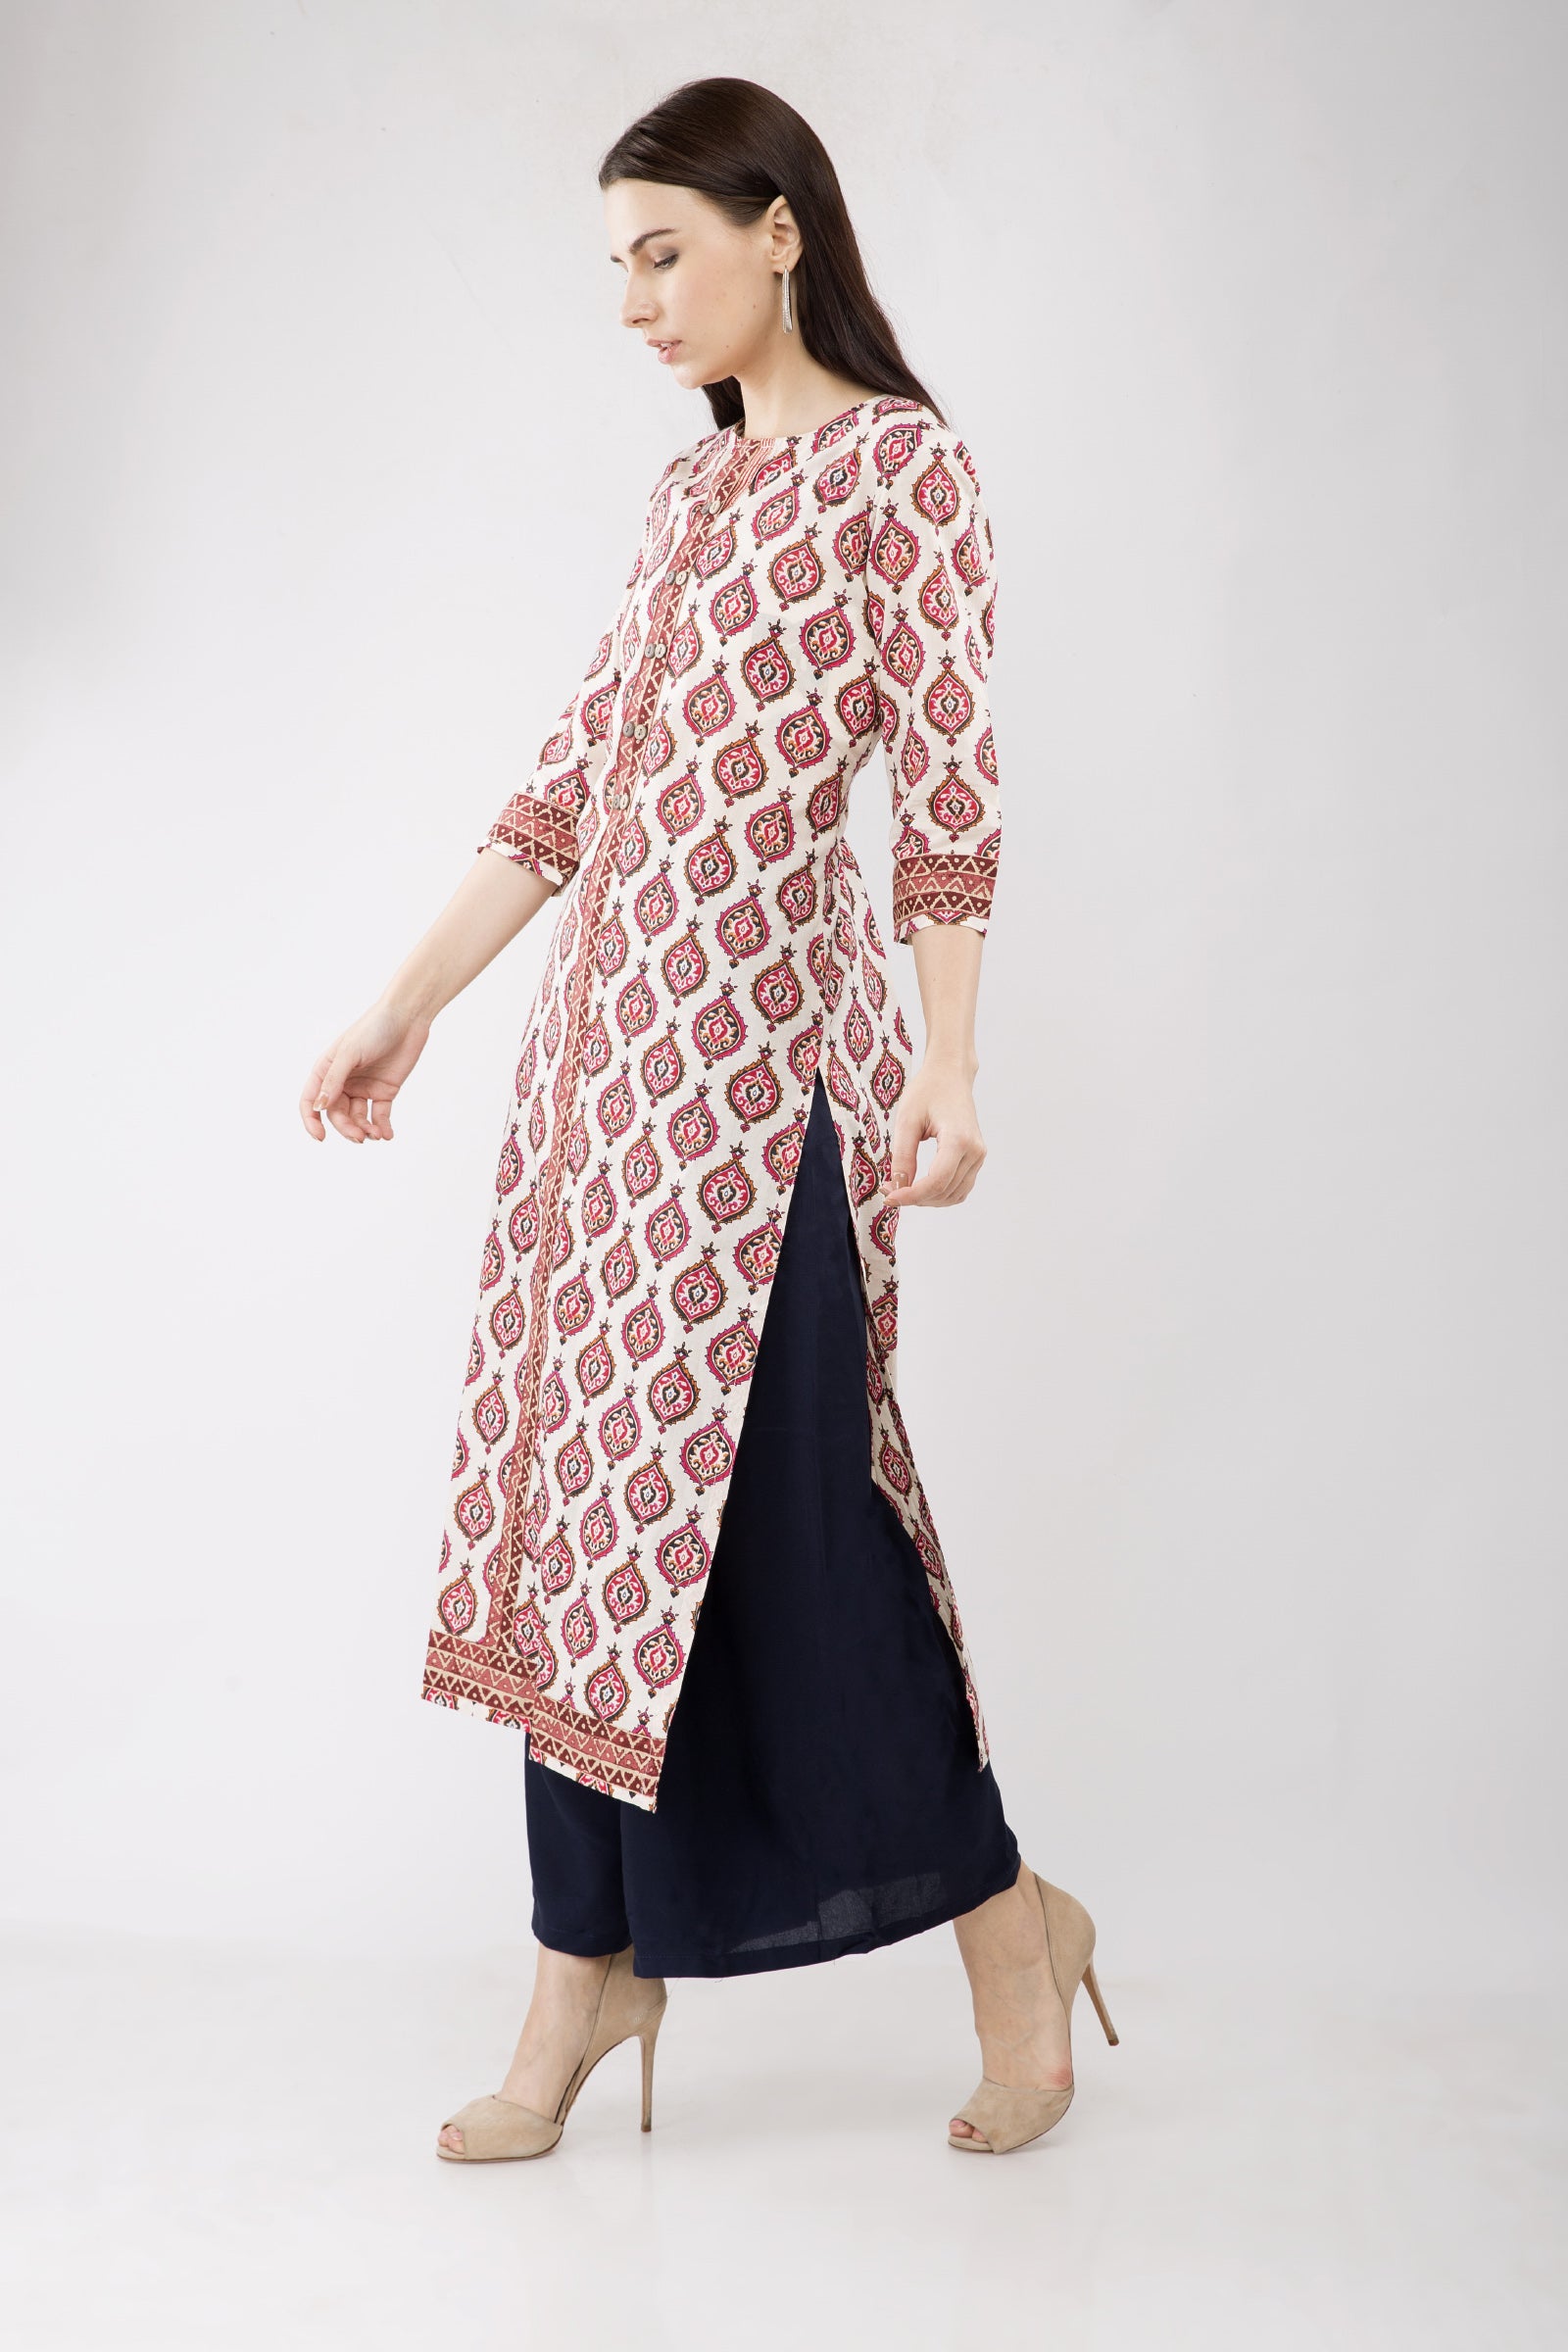 Buy ankle length kurti for women latest design in India @ Limeroad | page 6